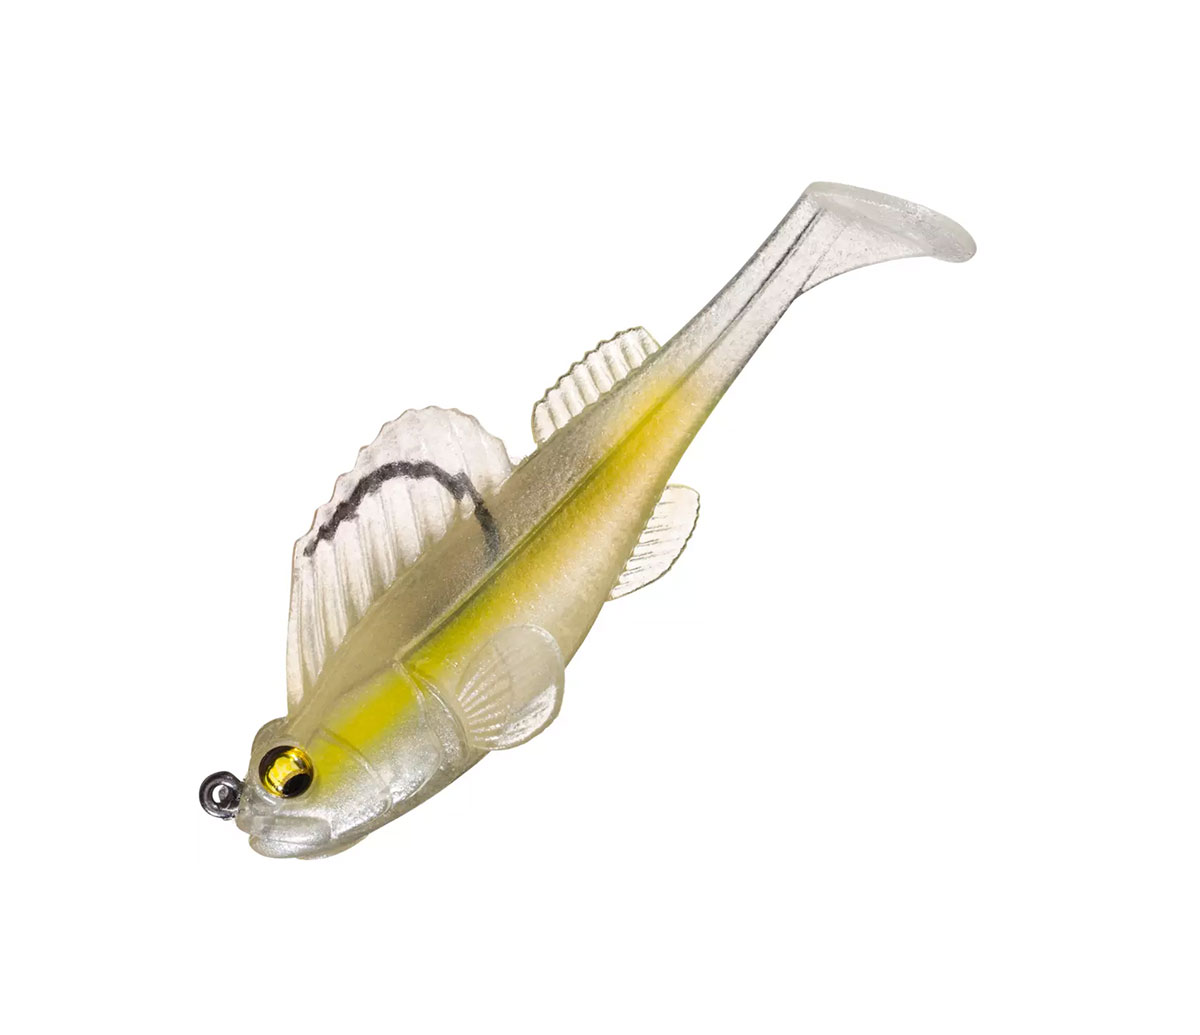 Funny Fishing Lure gift for men - Funny Fishing Lures - Funny